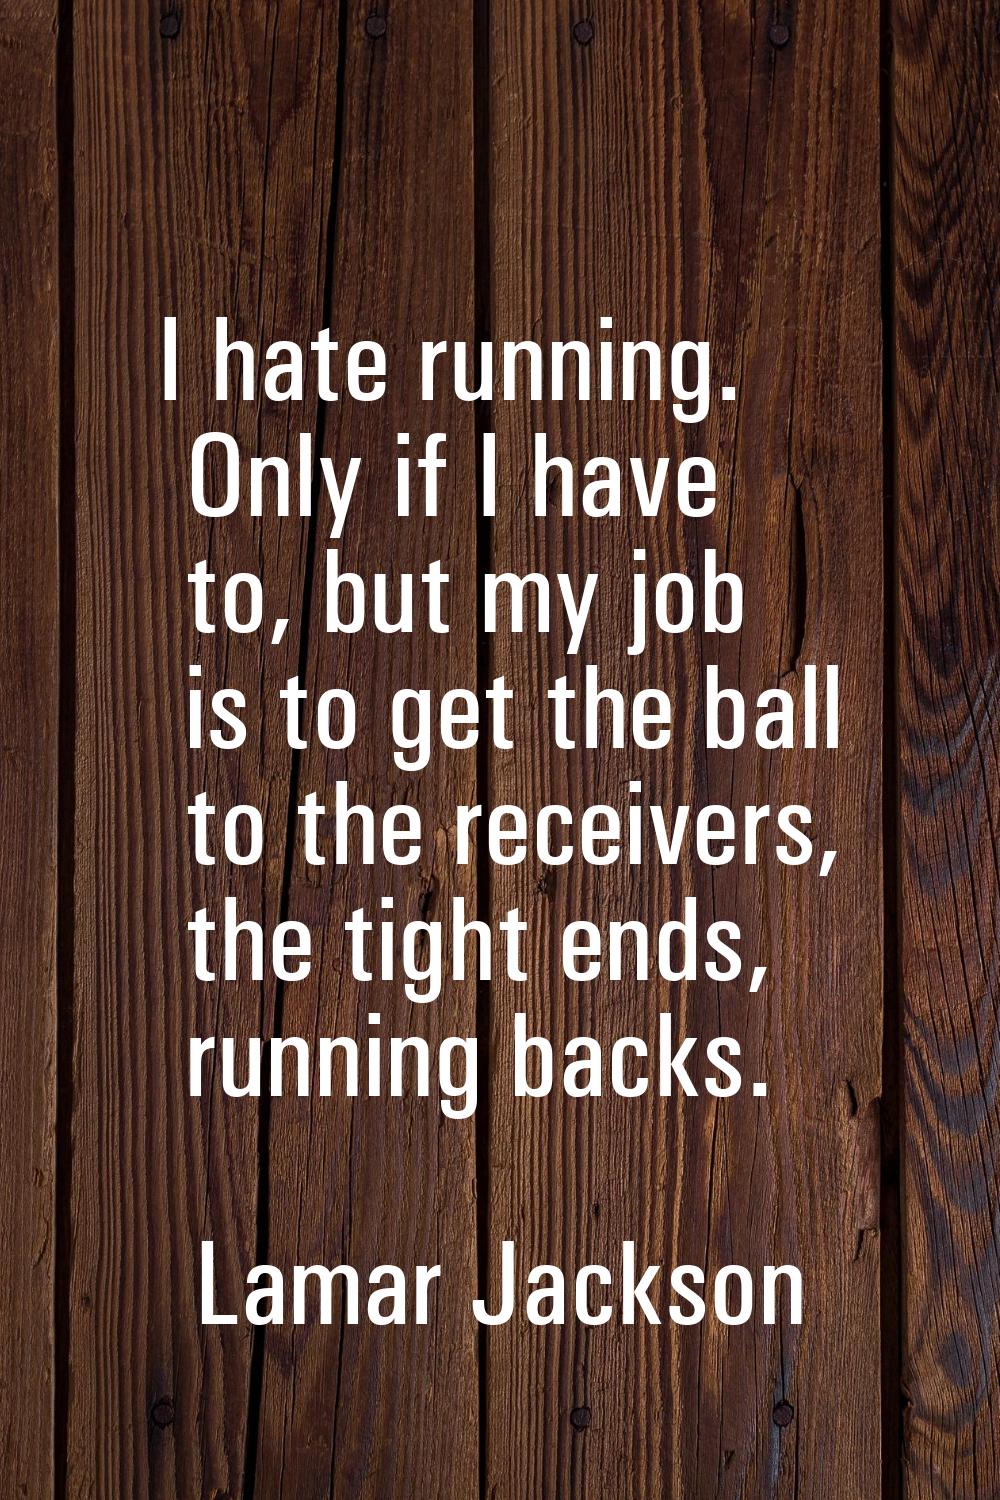 I hate running. Only if I have to, but my job is to get the ball to the receivers, the tight ends, 